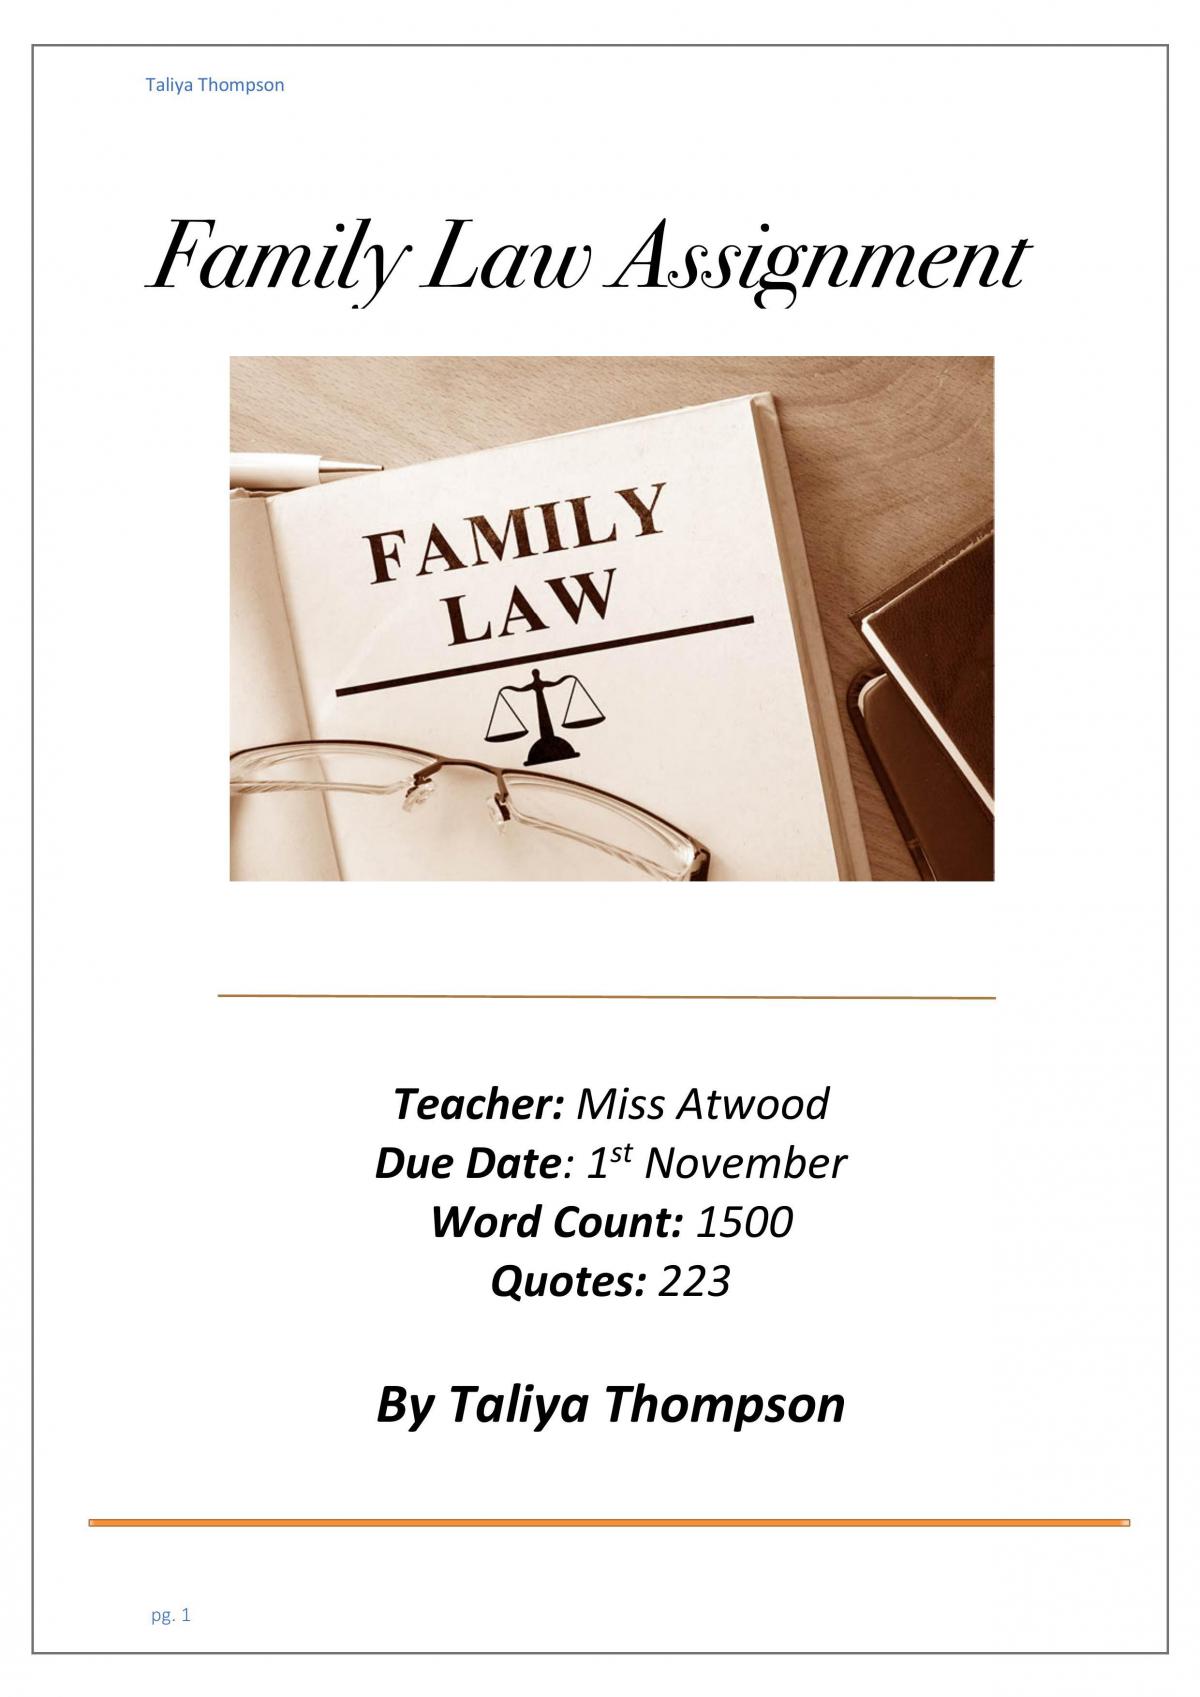 family law essay questions and answers